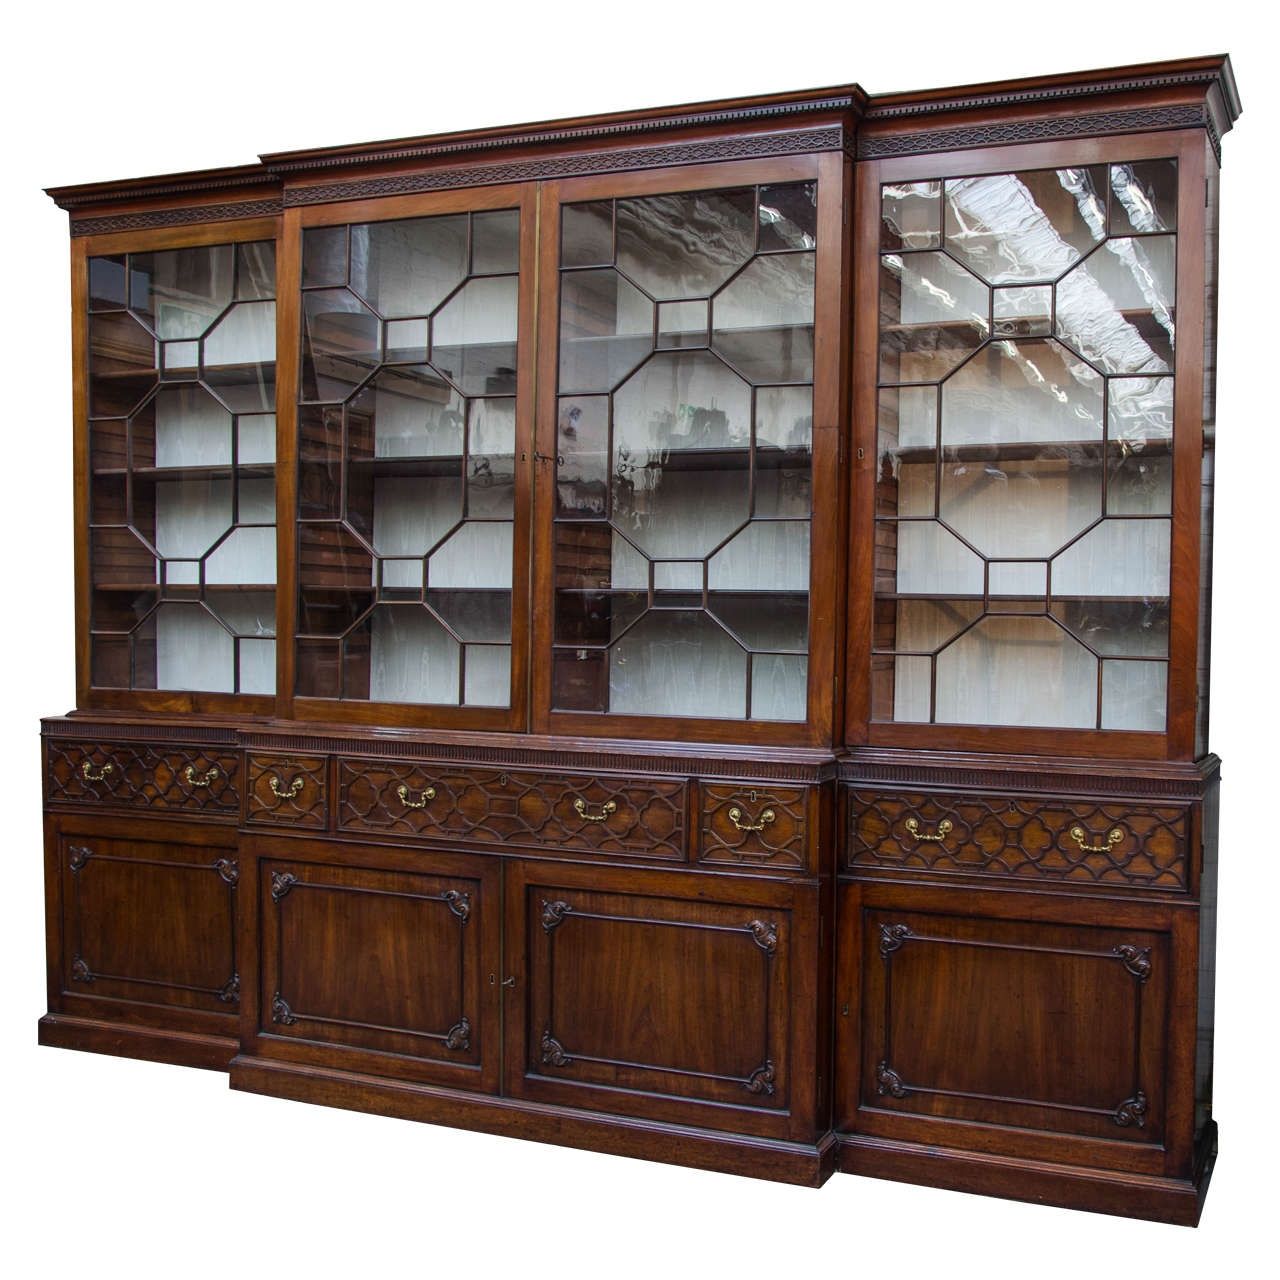 Mahogany Chippendale Period Breakfront Bookcase From A Unique Pertaining To Modern Breakfront (View 6 of 15)